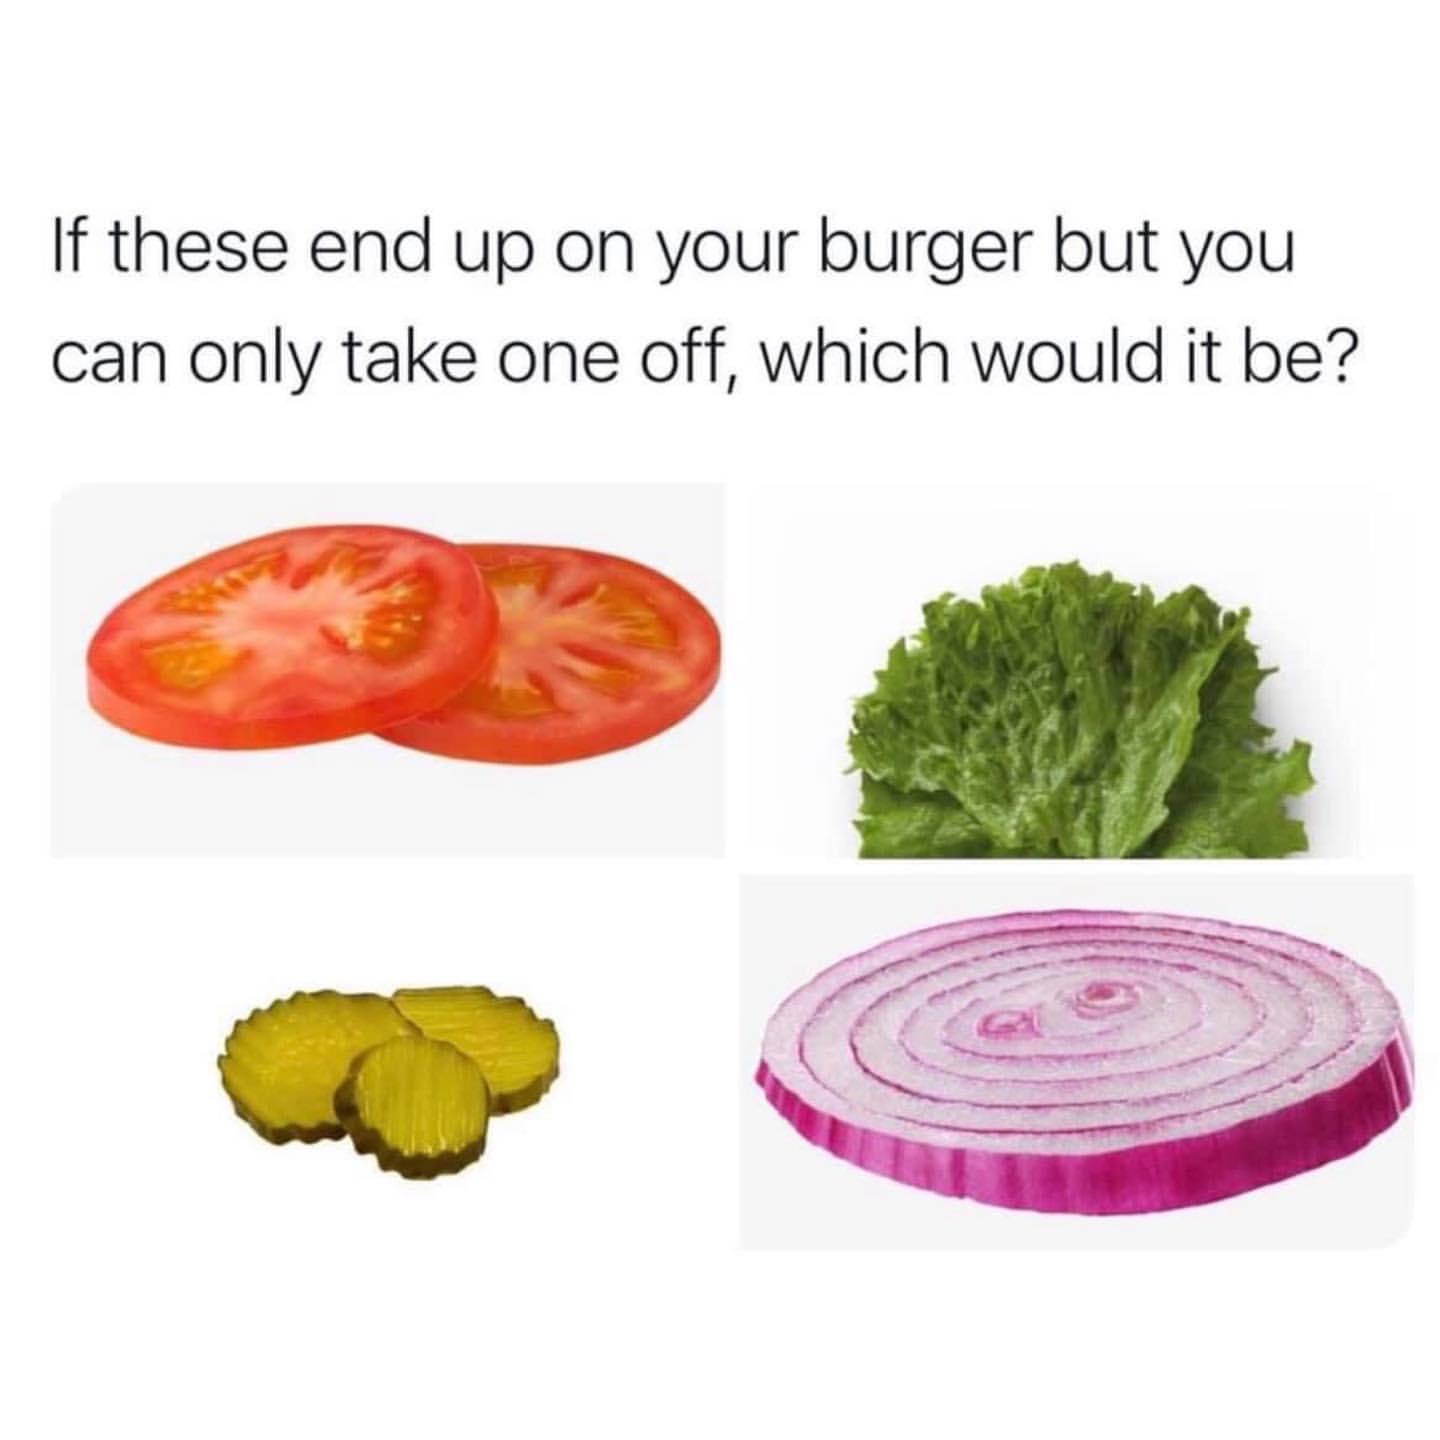 If these end up on your burger but you can only take one off, which would it be?